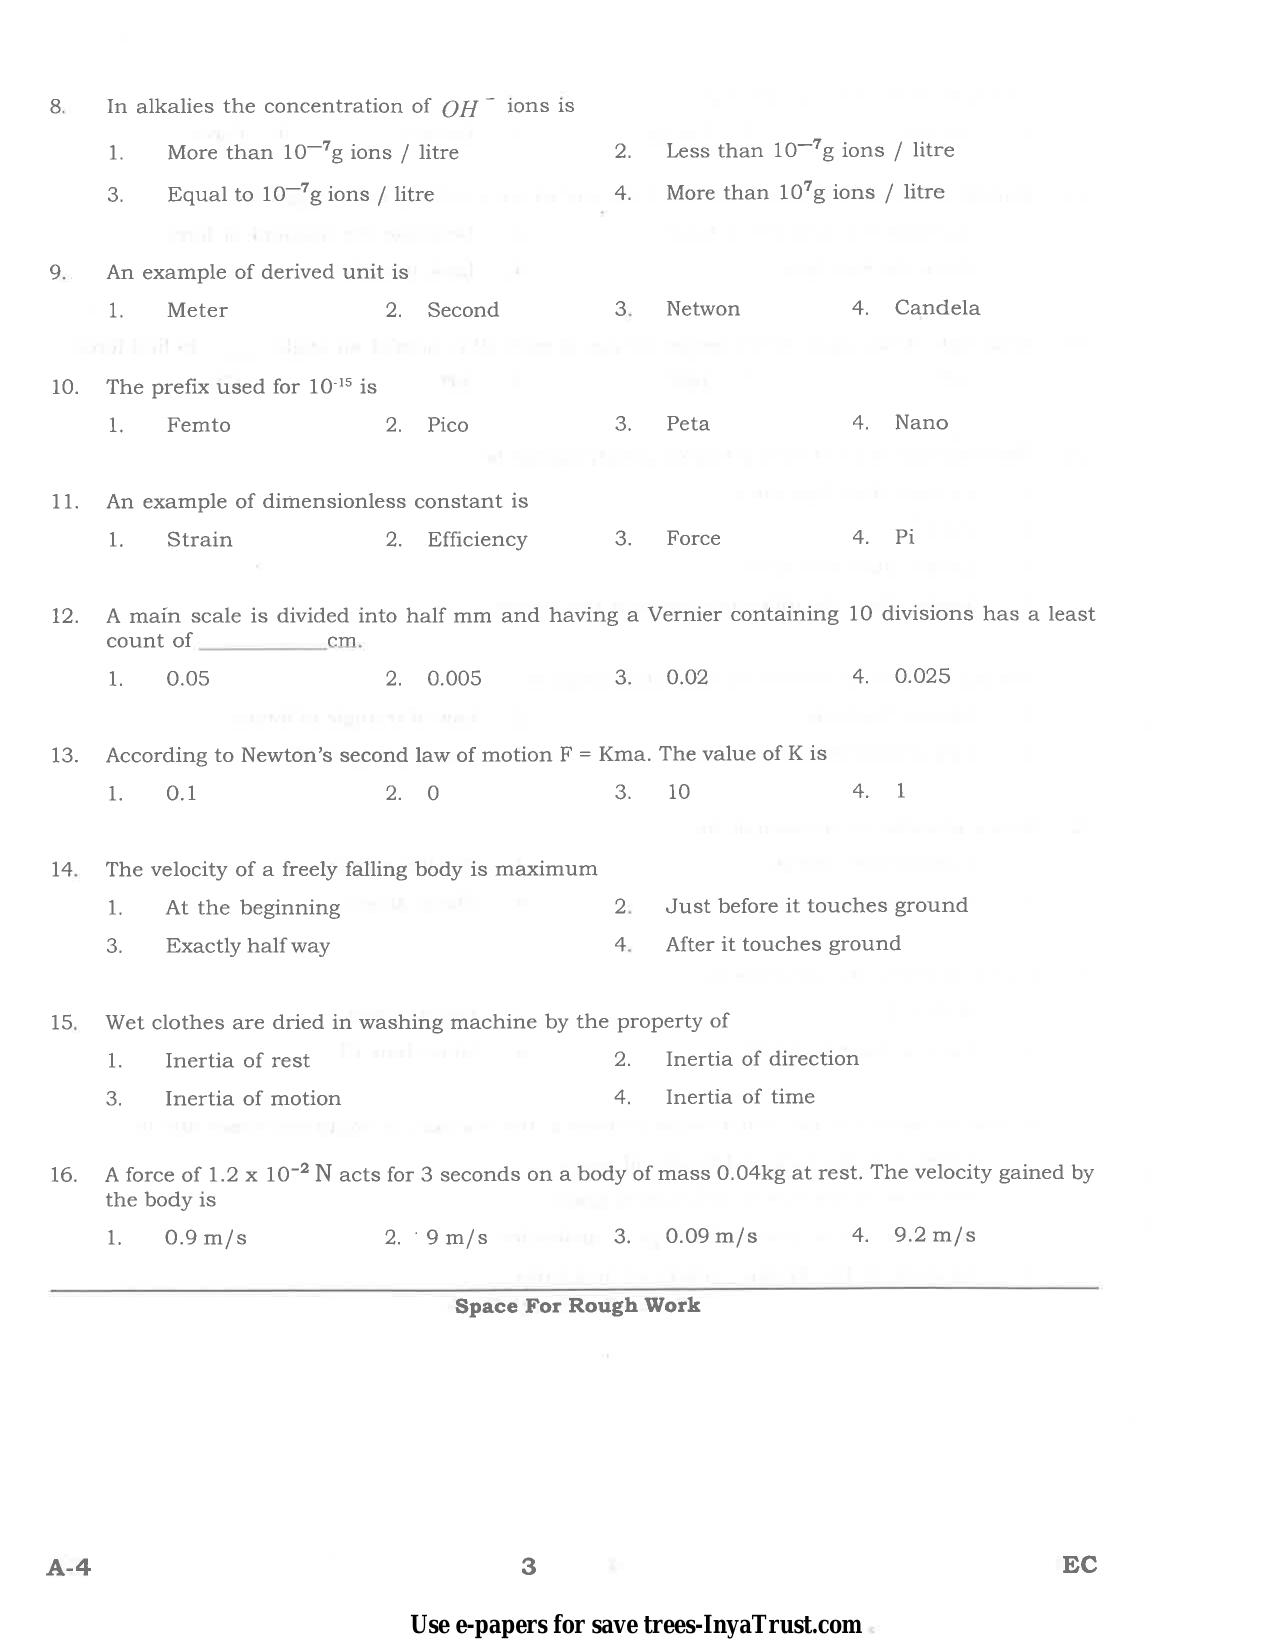 Karnataka Diploma CET- 2015 Electronics and Communication Engineering Question Paper - Page 3